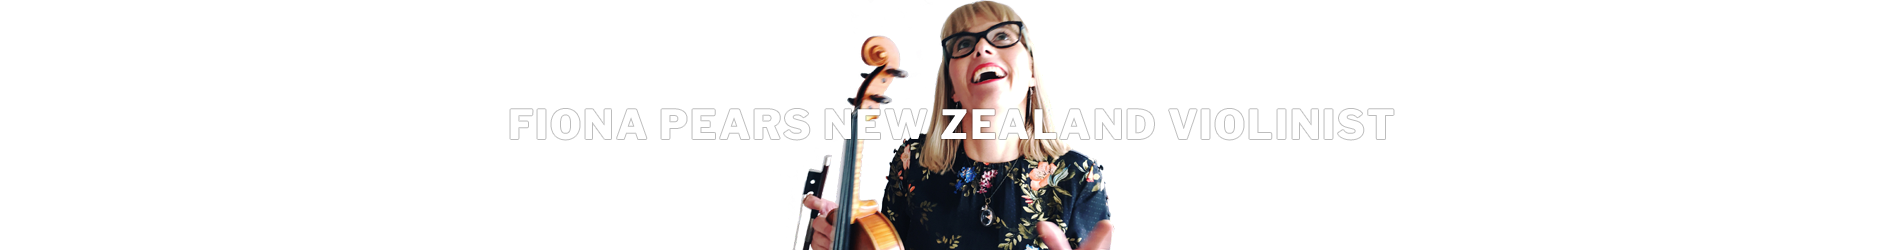 Fiona Pears New Zealand Violinist